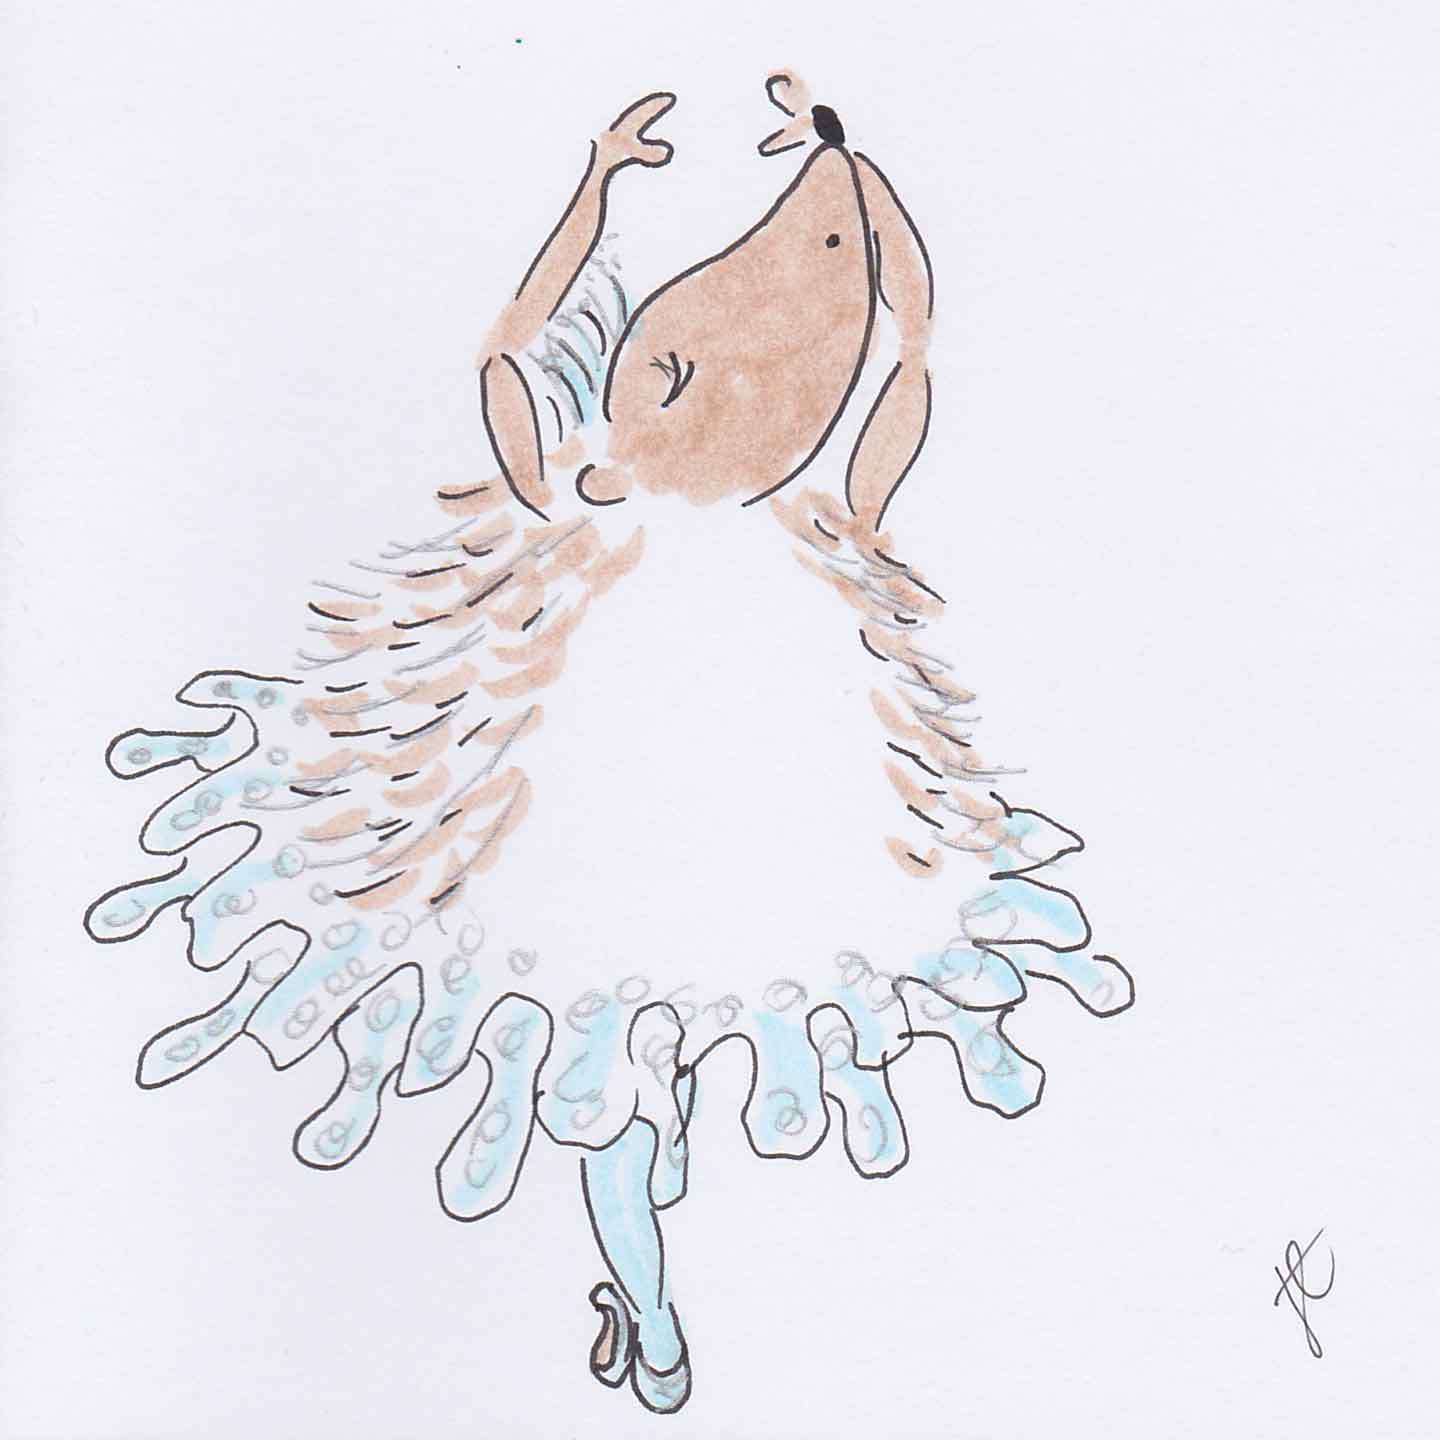 Snowflake ballerina – hand-drawn festive card with Hedgie ballet character